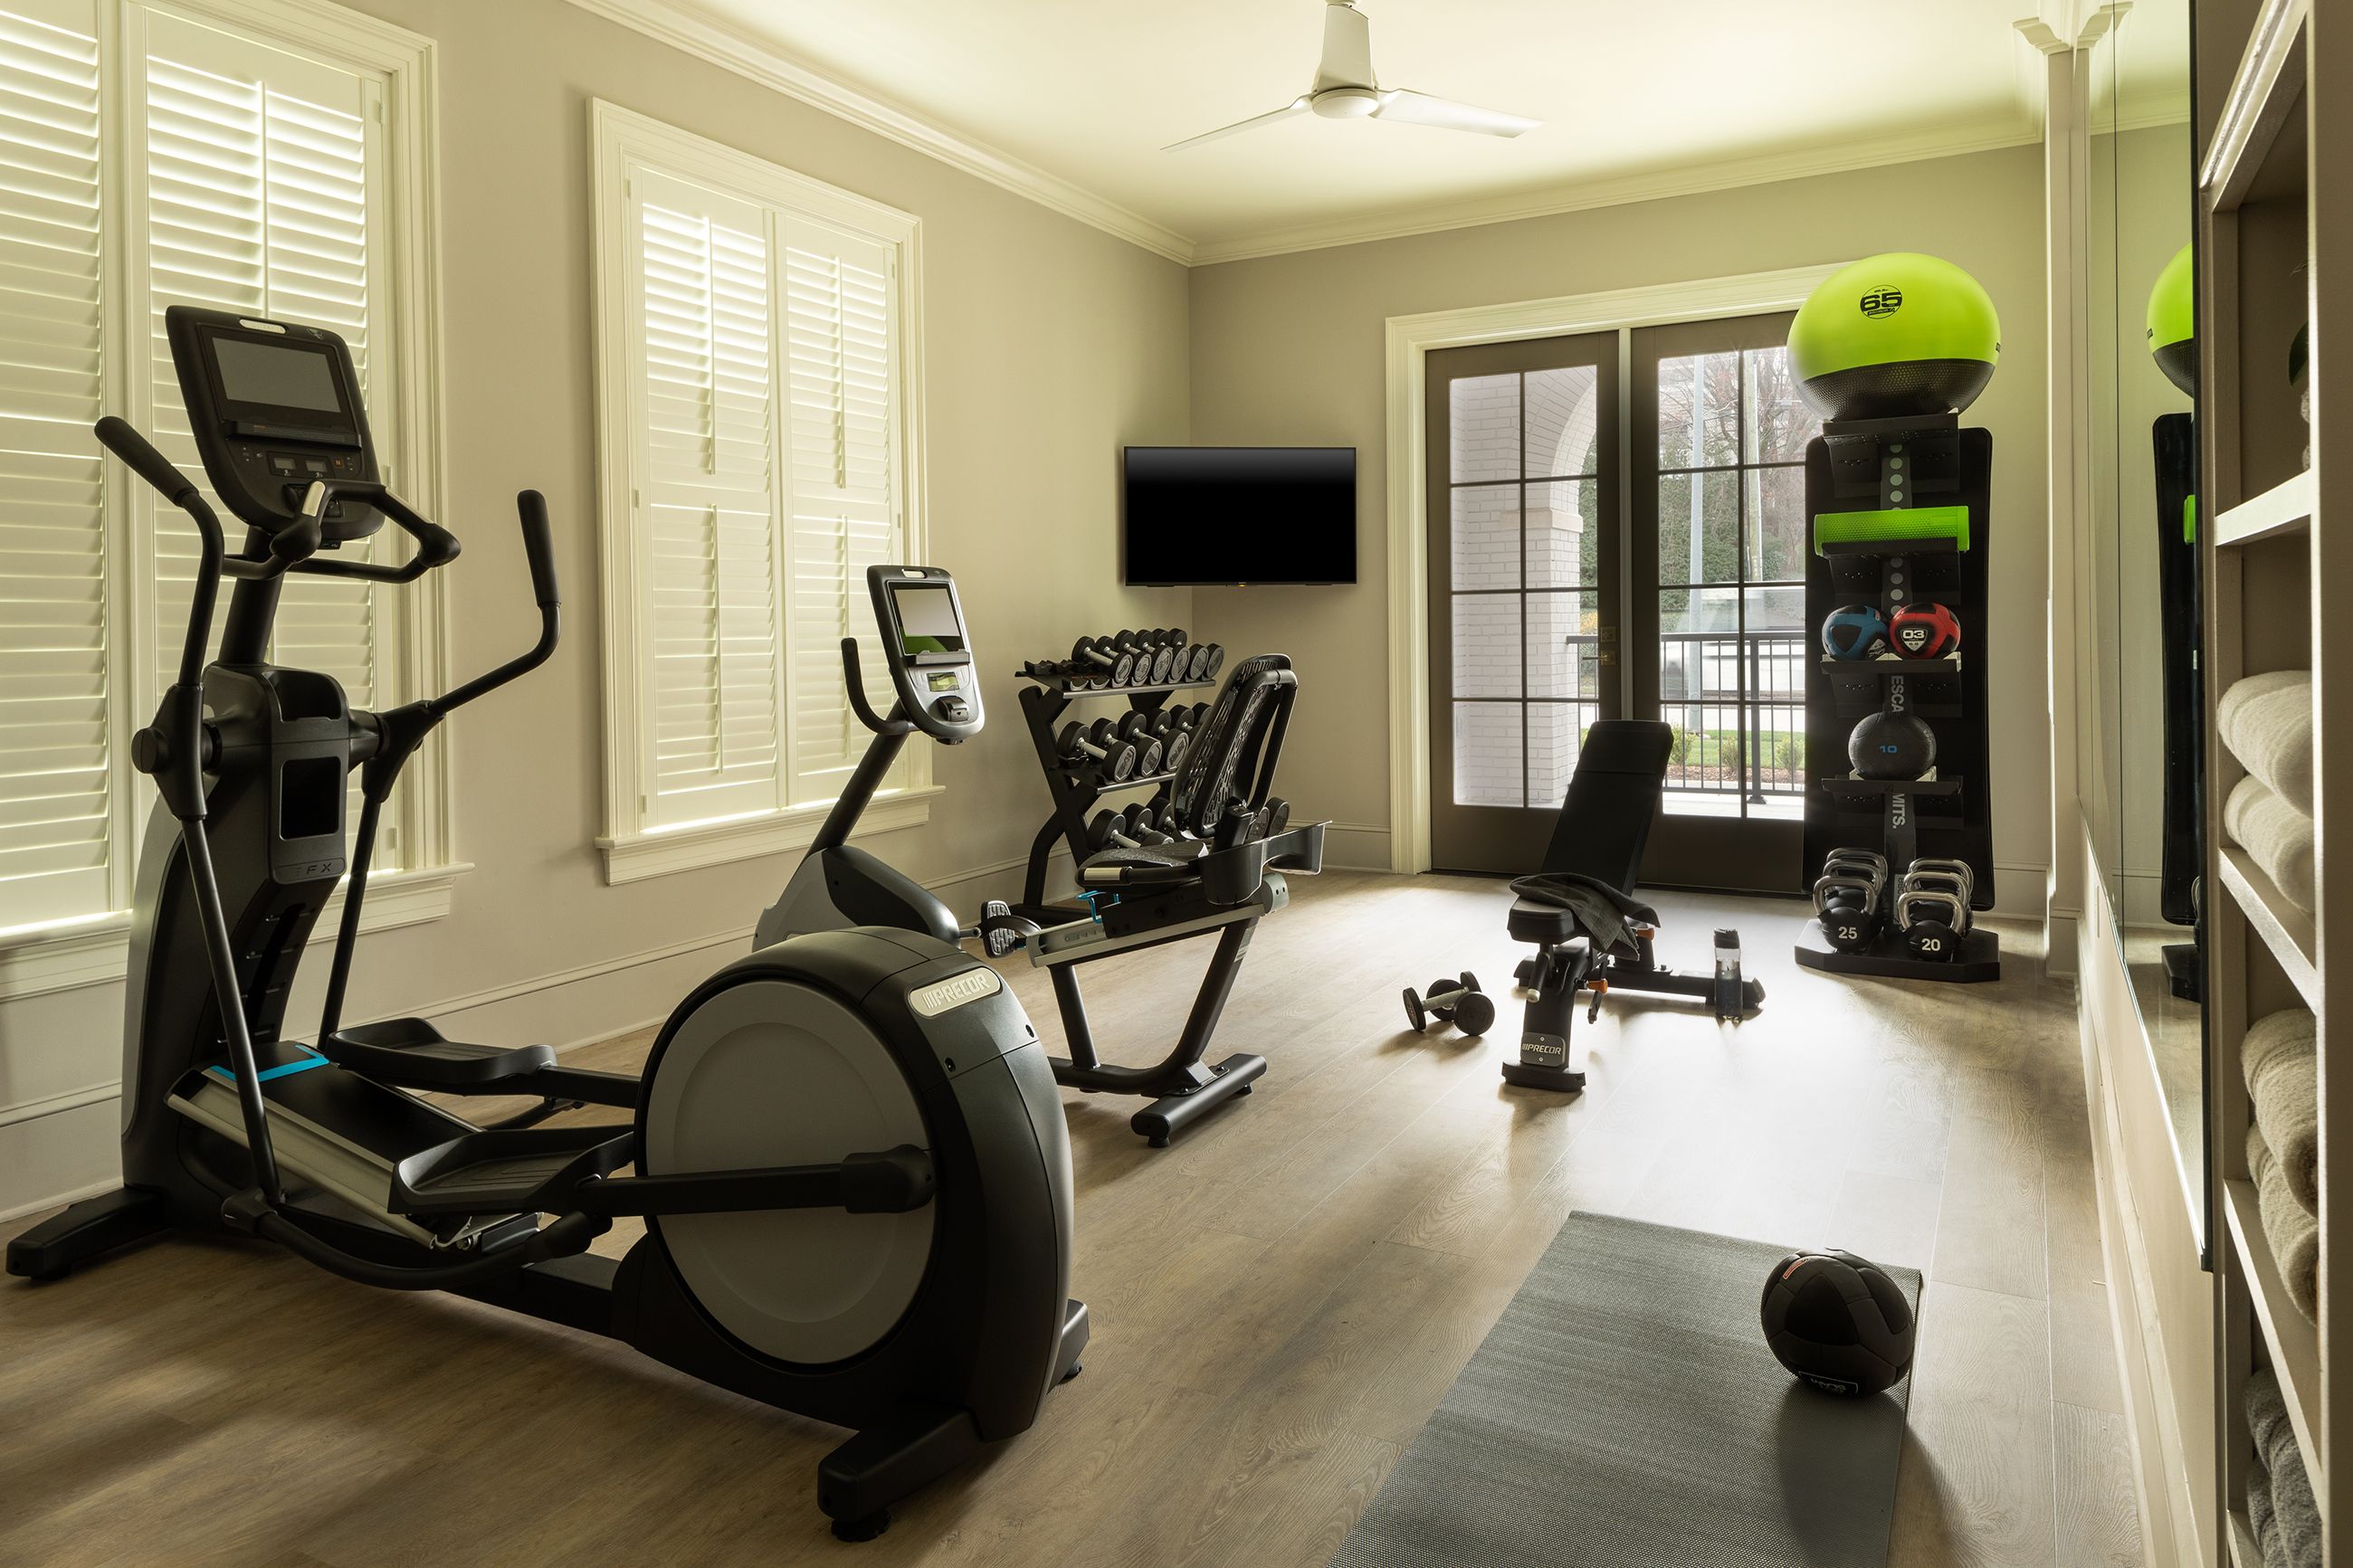 The Best Home Gym Hacks for Small Spaces  Gym room at home, Workout room  home, Home gym decor